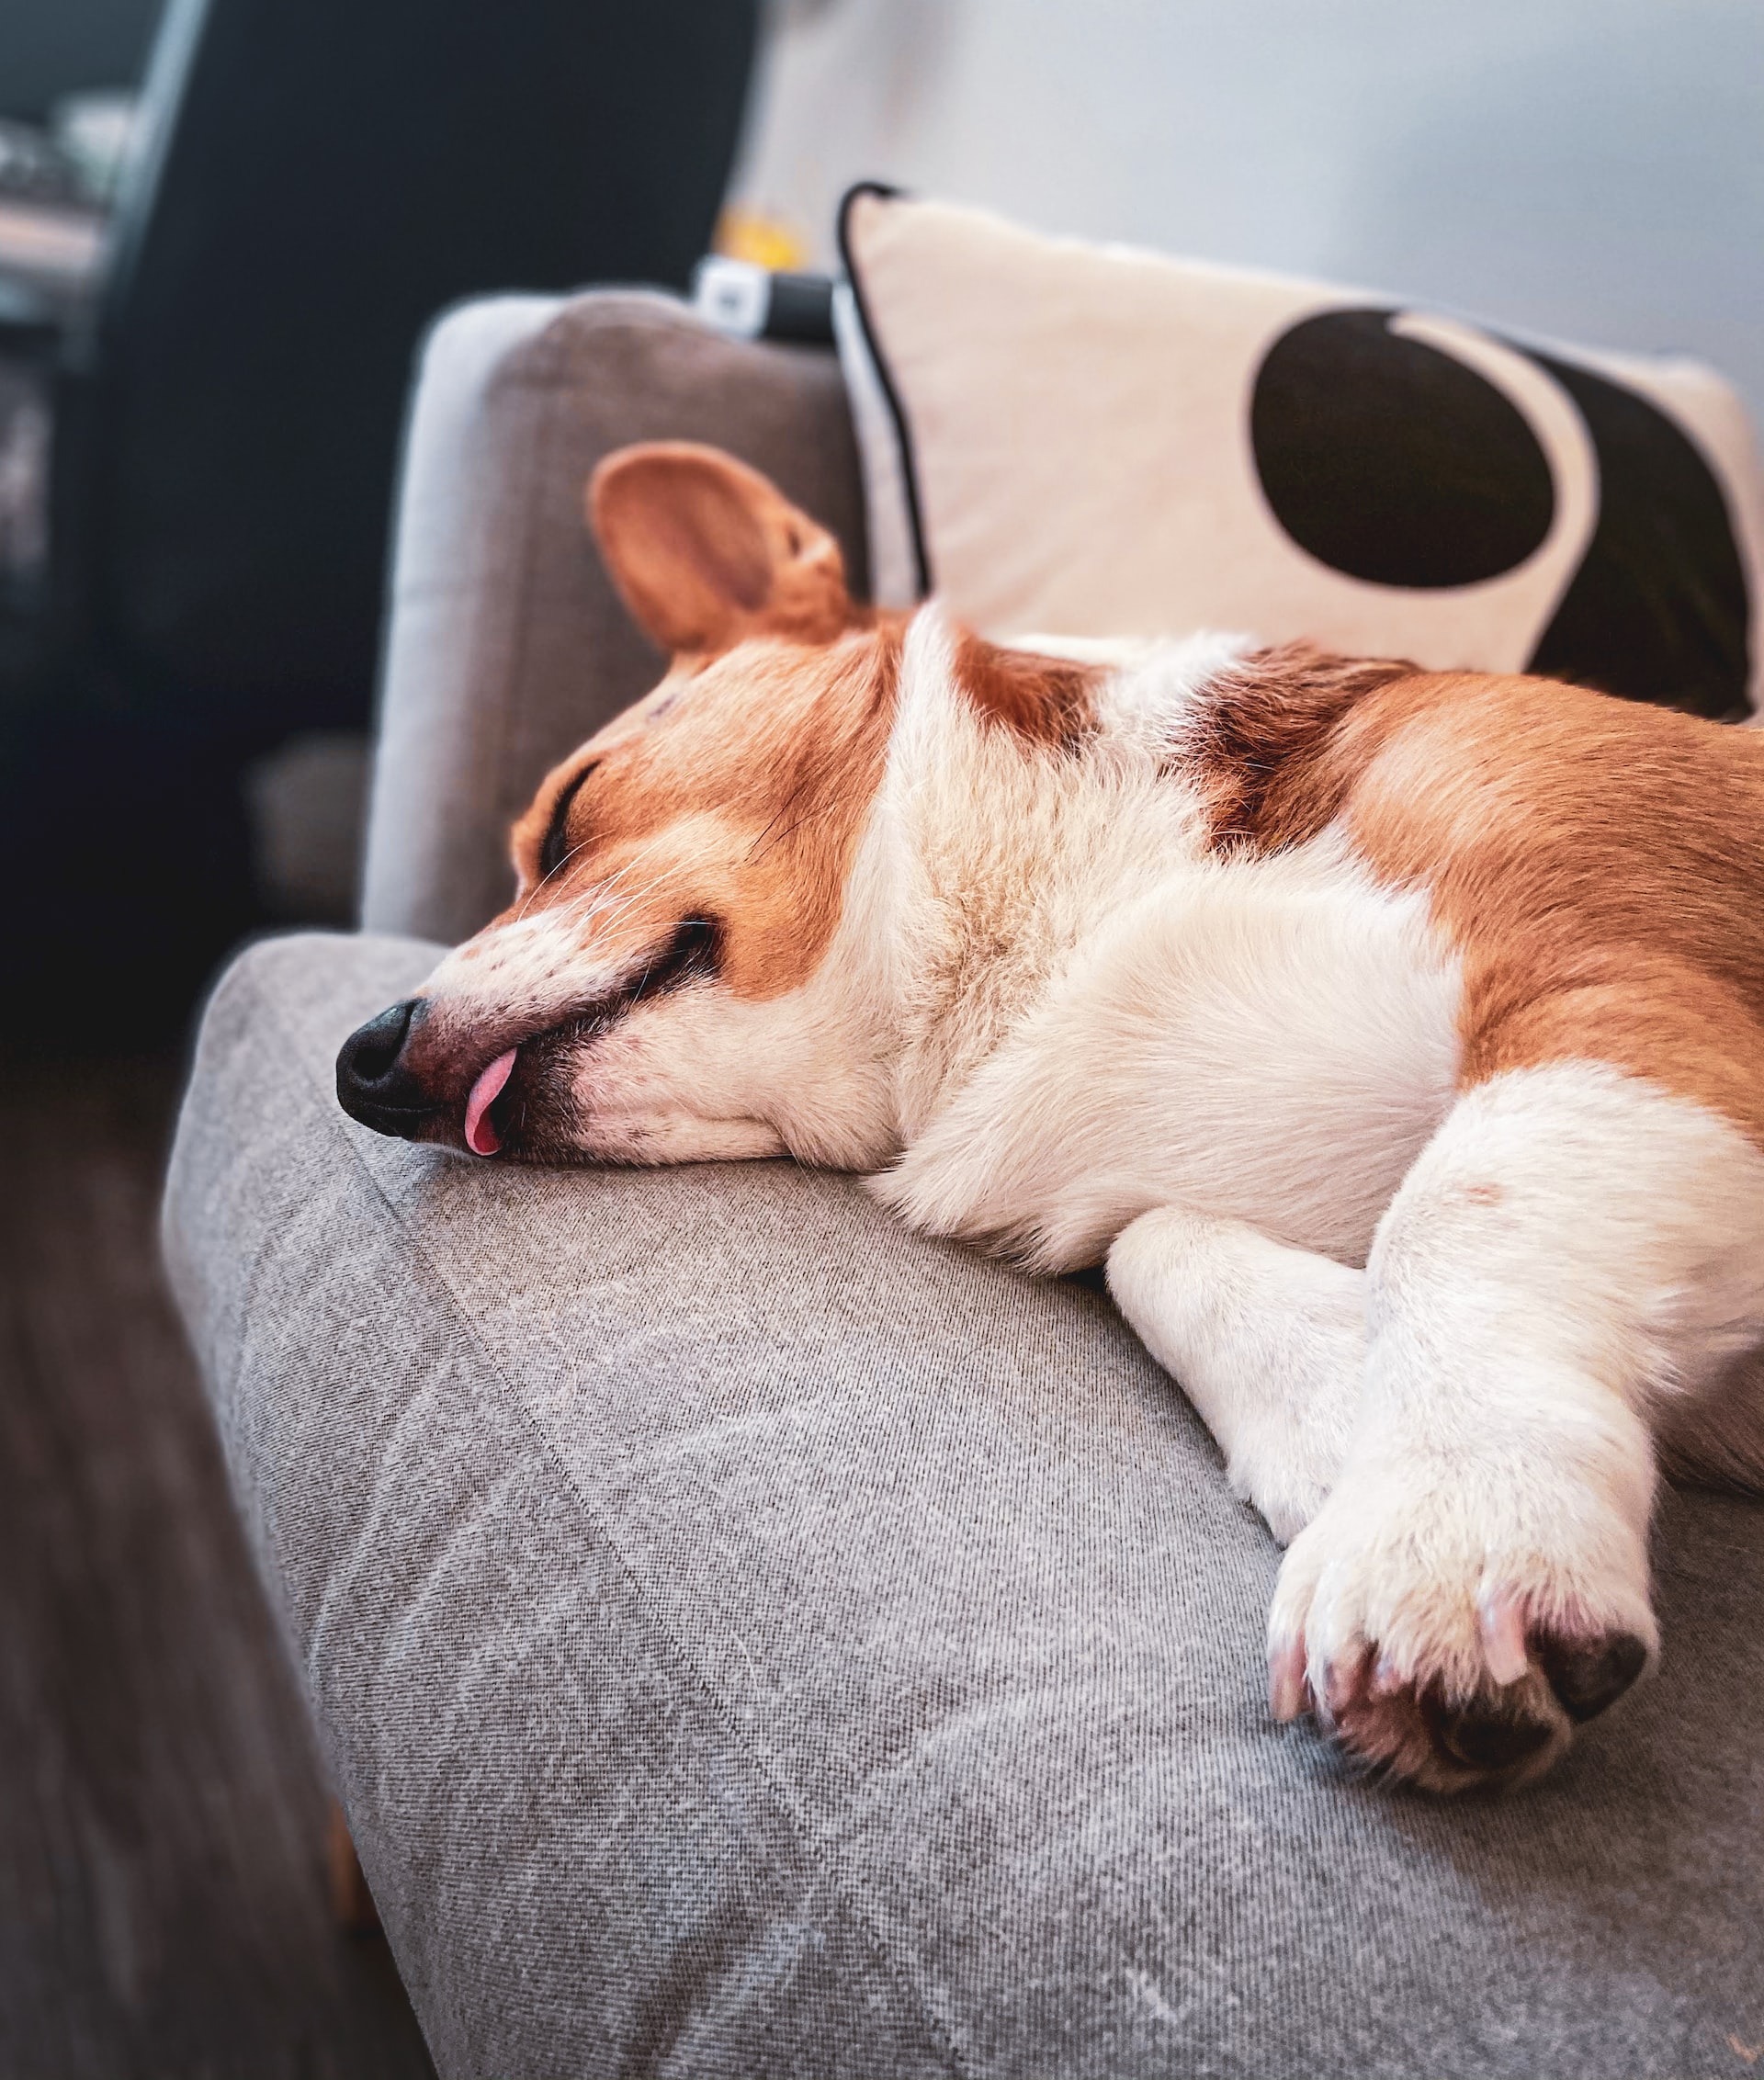 A puppy sleeping on a couch with it's tongue hanging out slightly. Image by Samantha Jean from Unsplash.